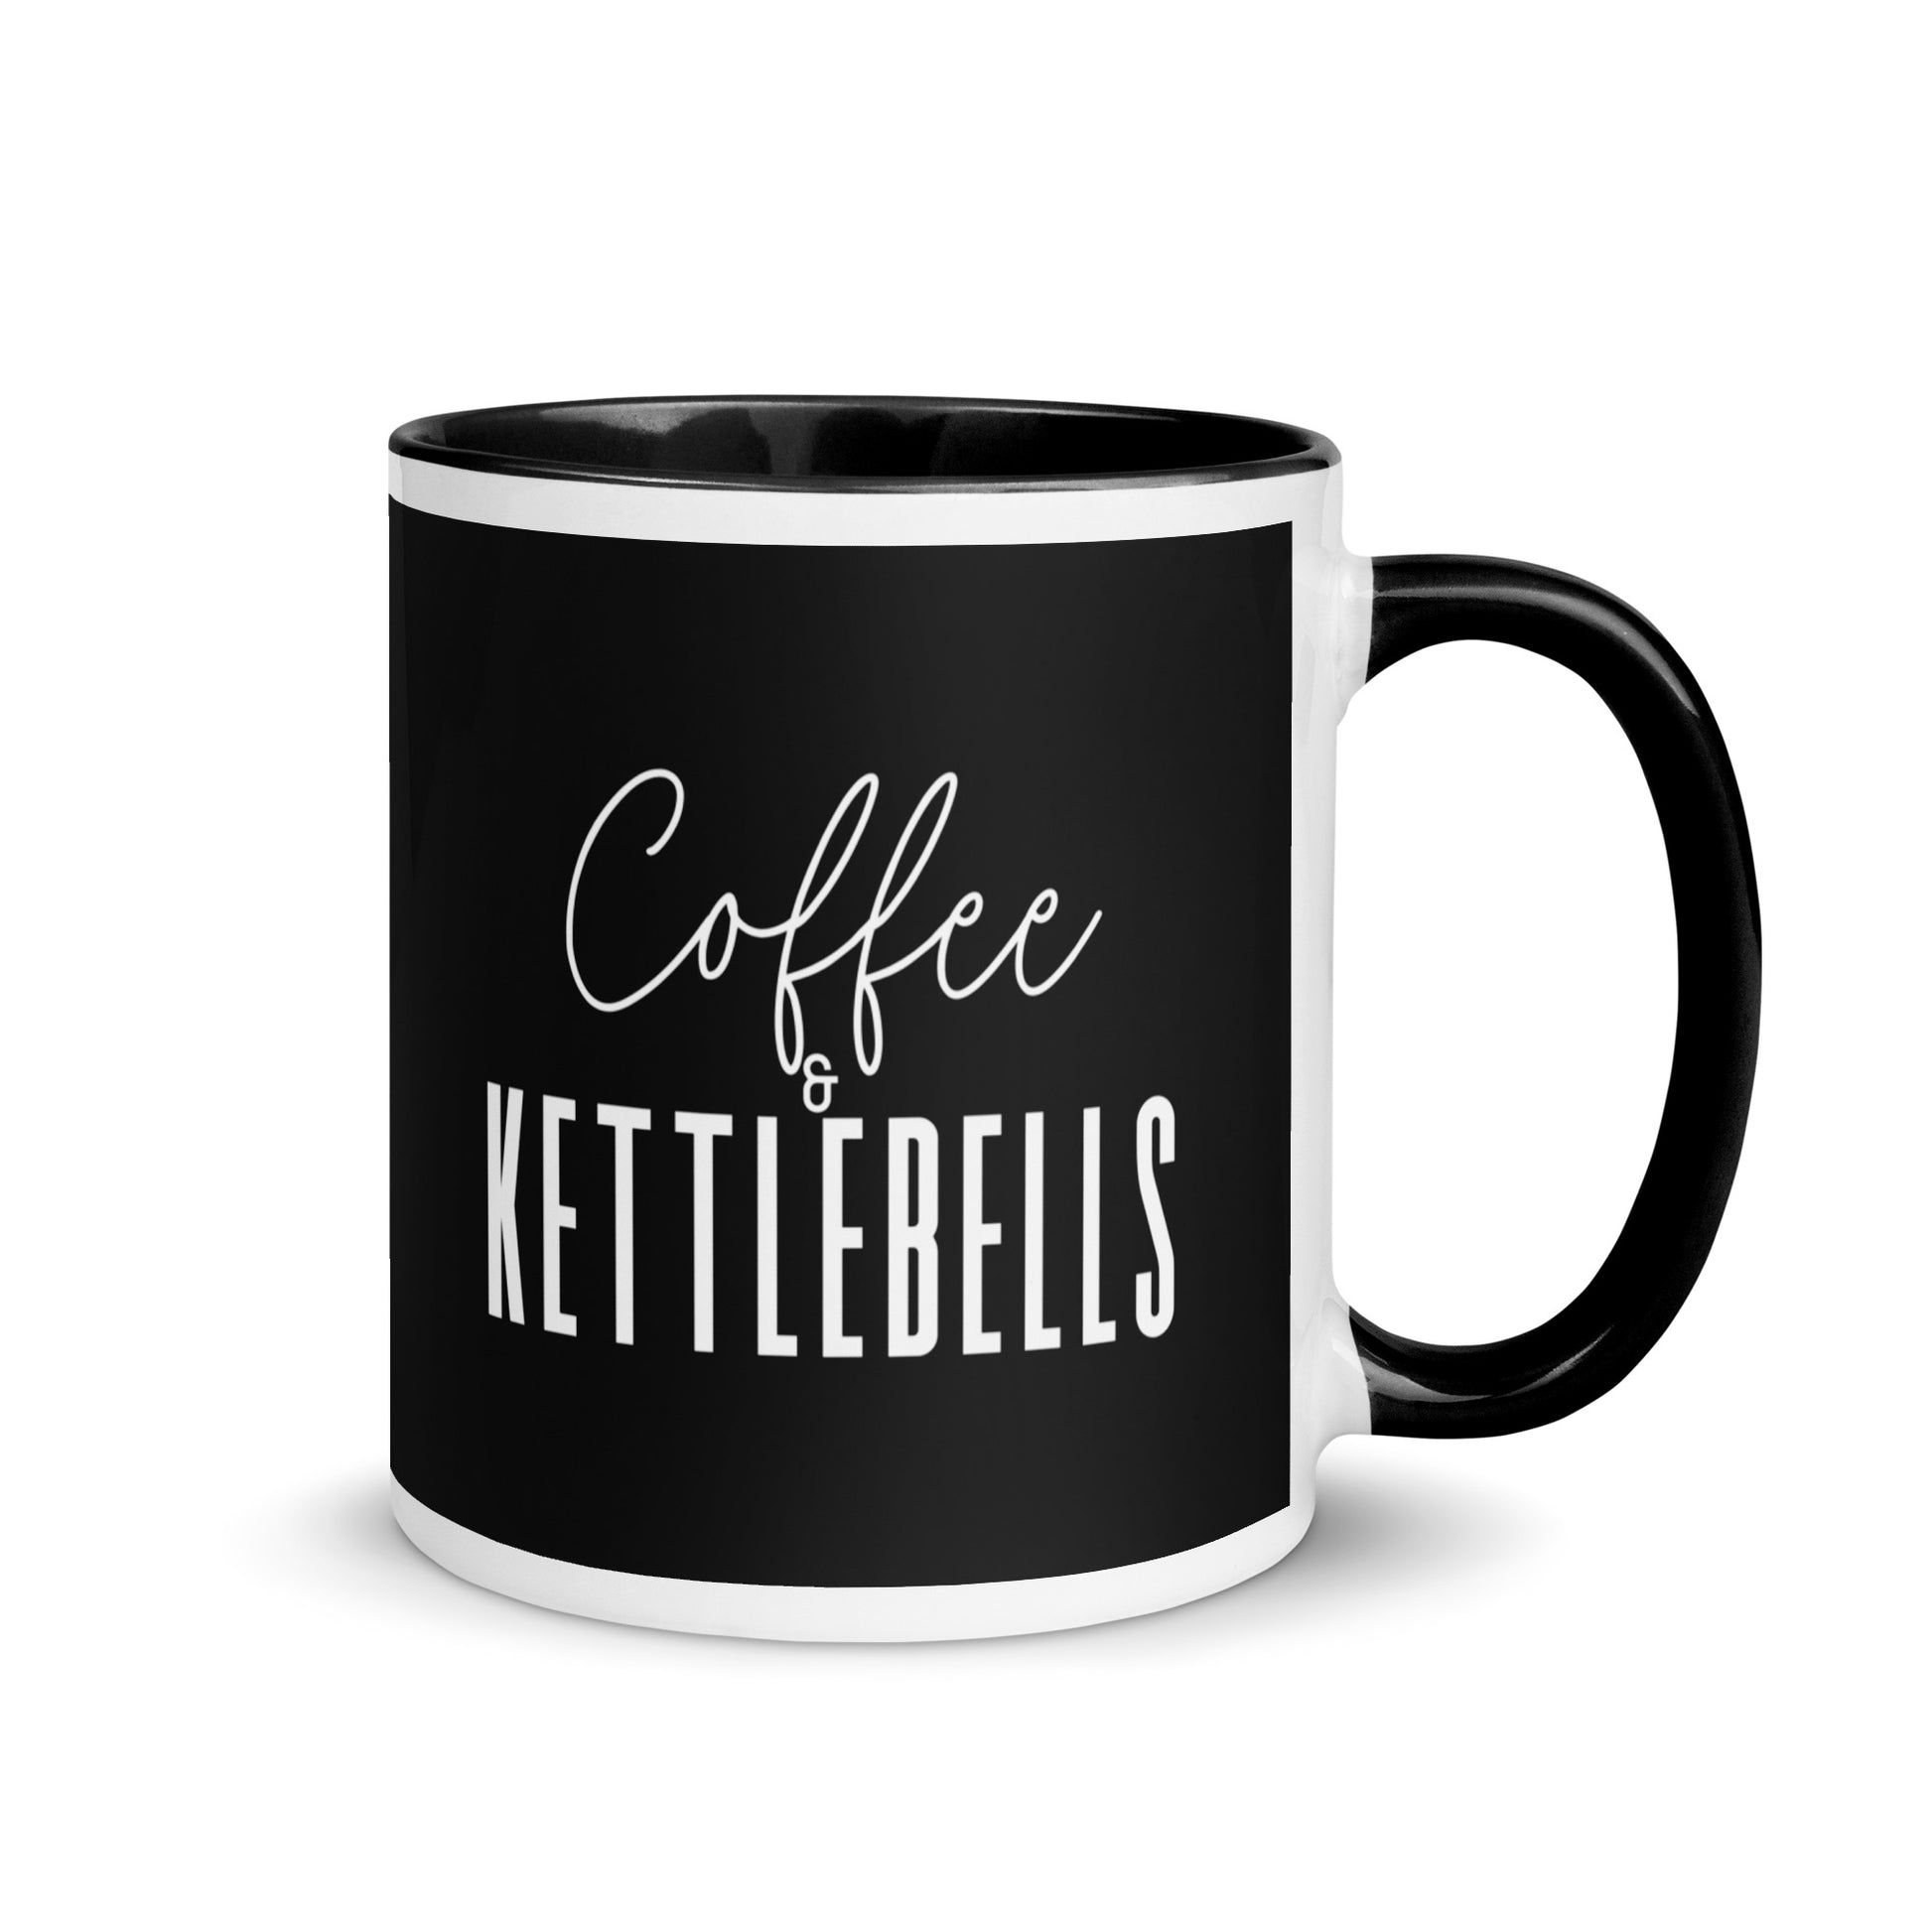 black mug with the words coffee and kettlebells in a white font